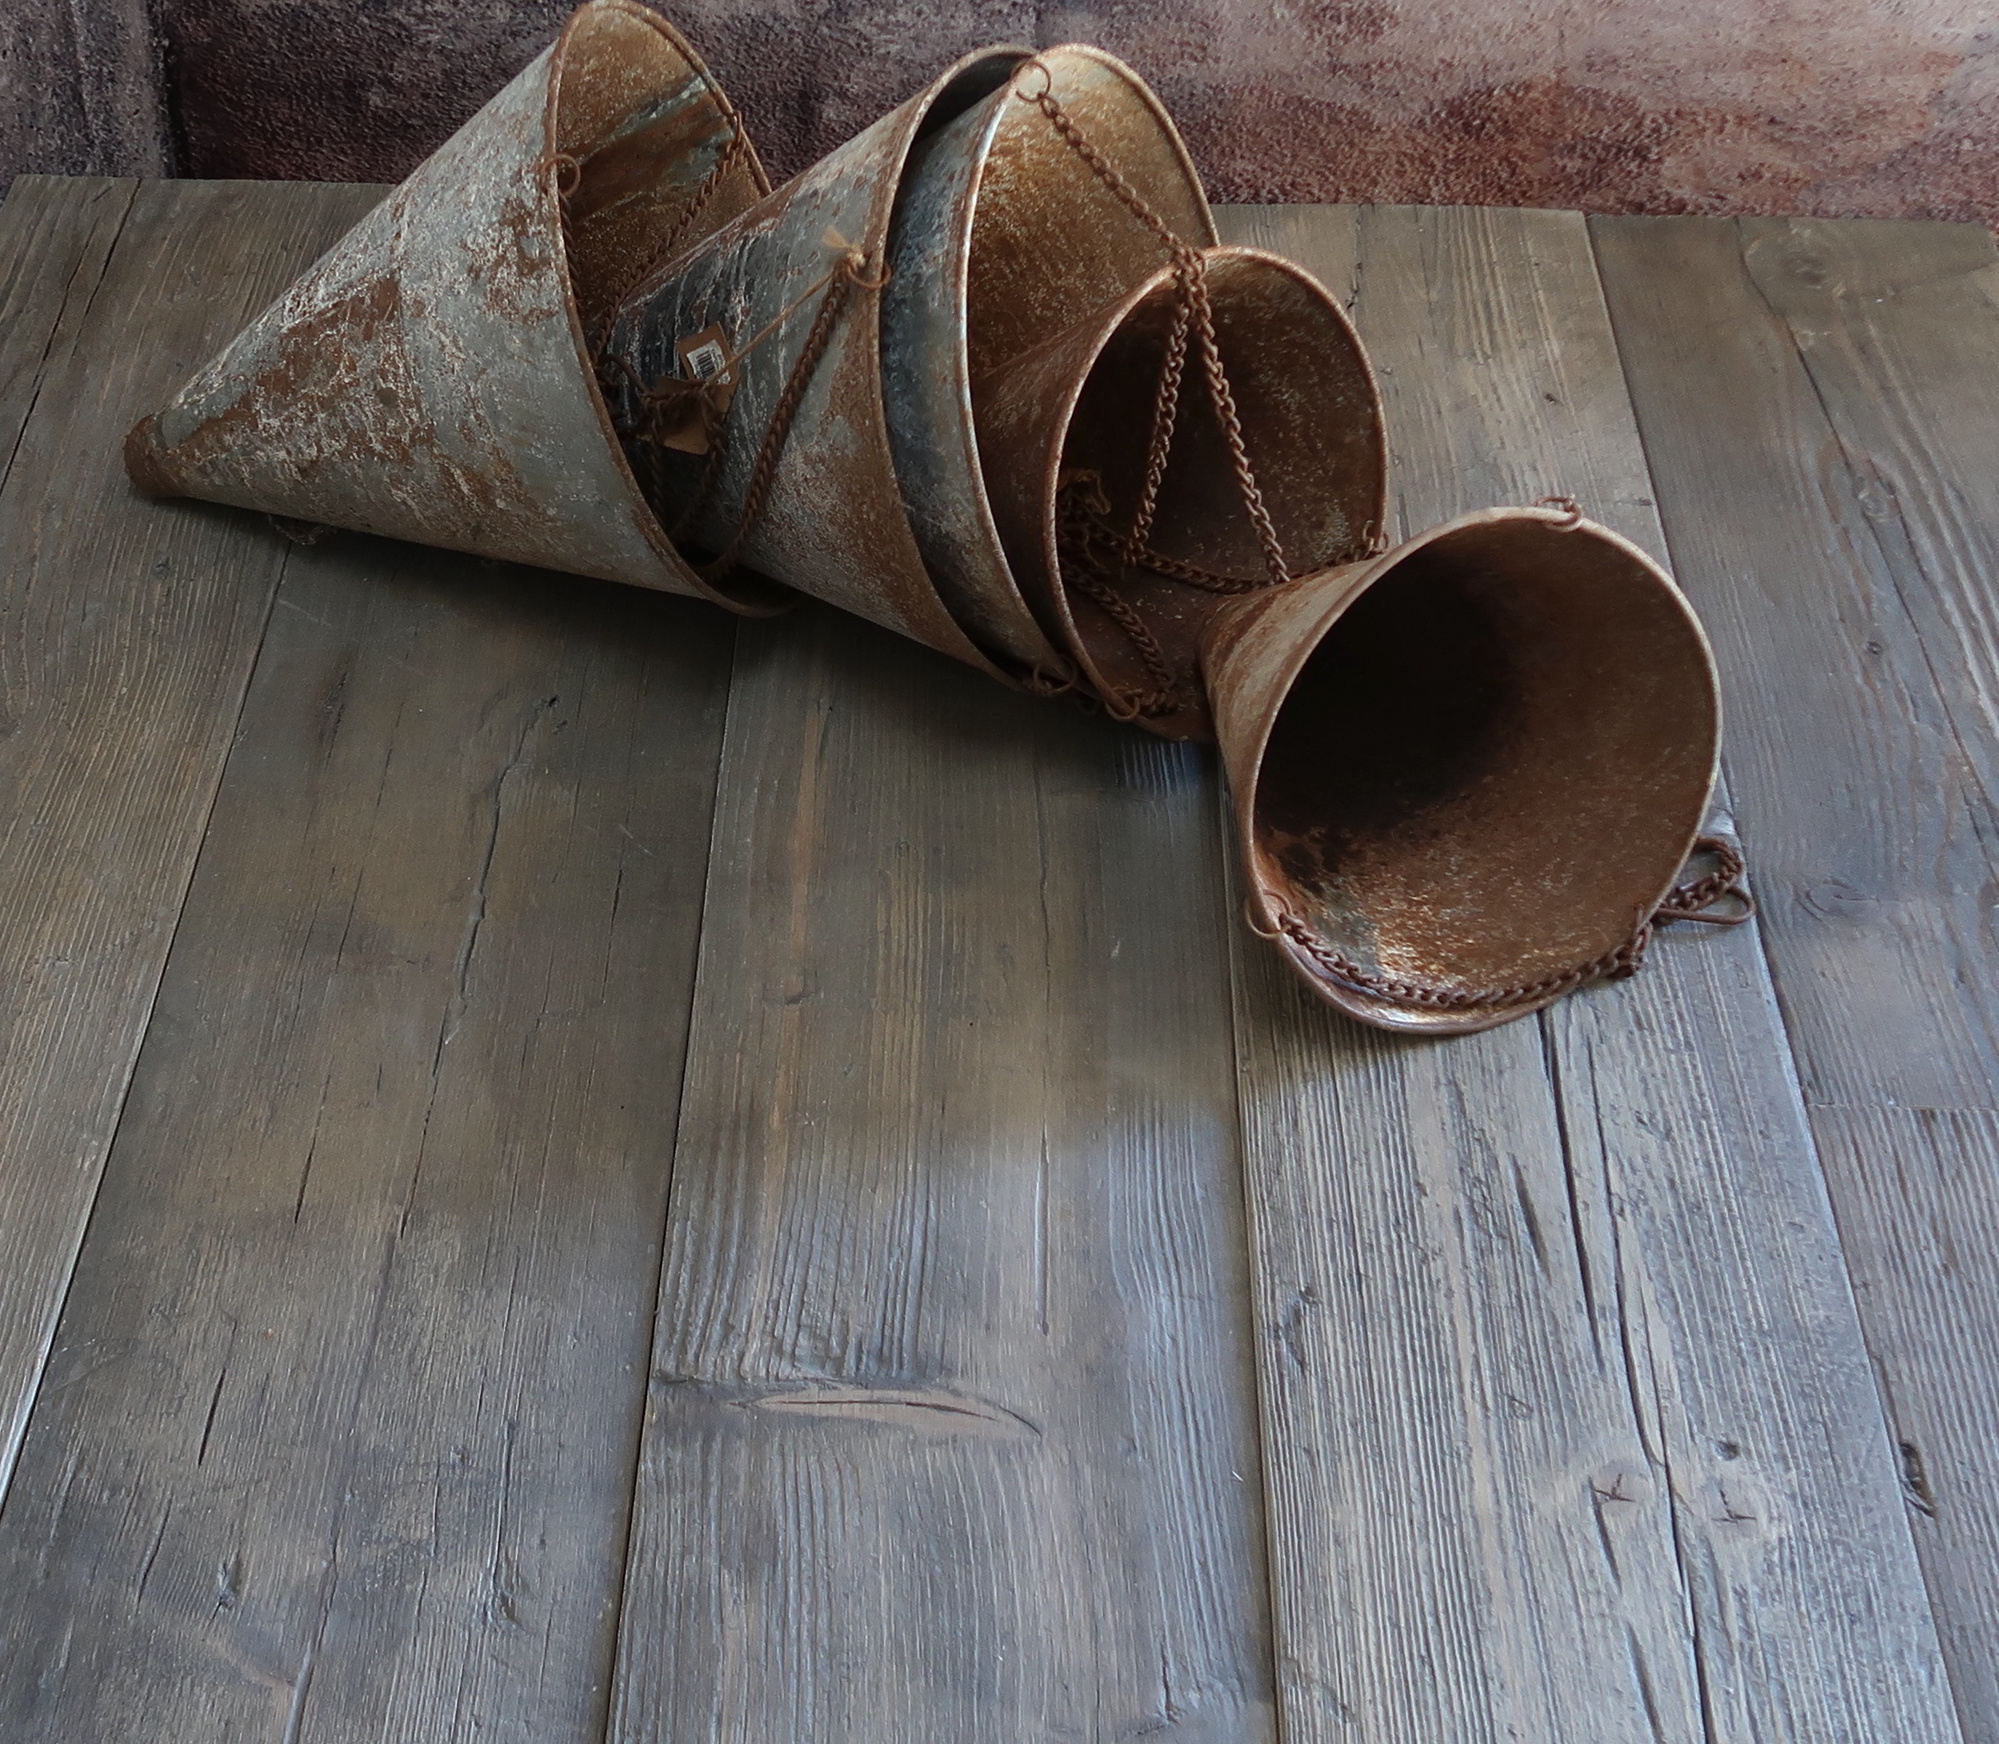 Will We Eventually Run Out Of Reclaimed Wood?